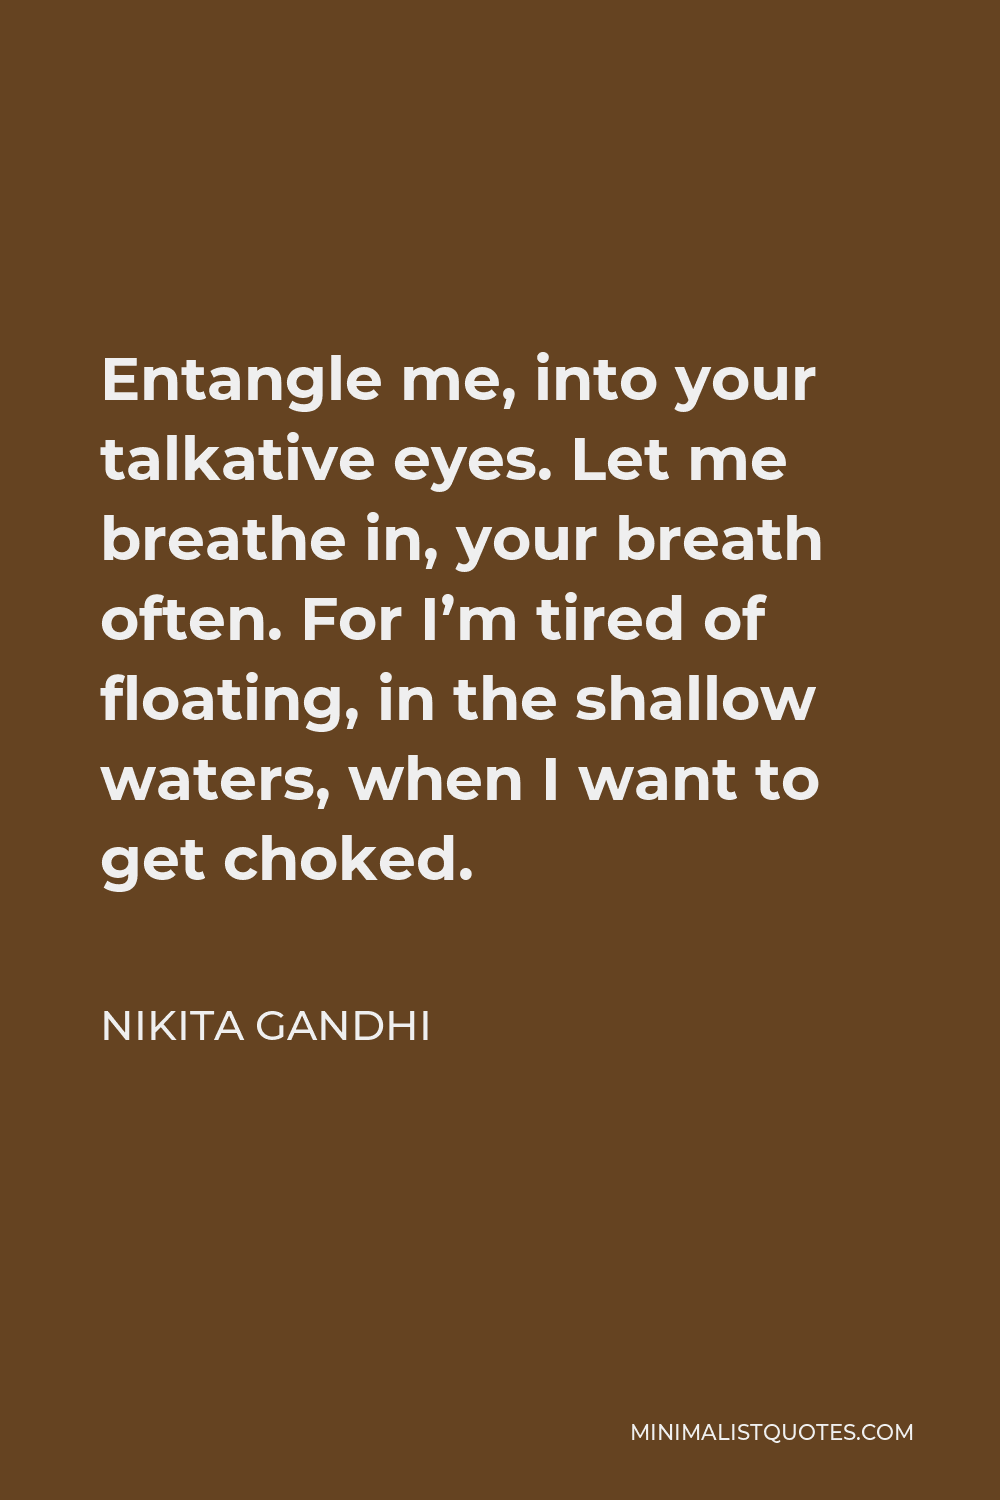 Nikita Gandhi Quote - Entangle me, into your talkative eyes. Let me breathe in, your breath often. For I’m tired of floating, in the shallow waters, when I want to get choked.